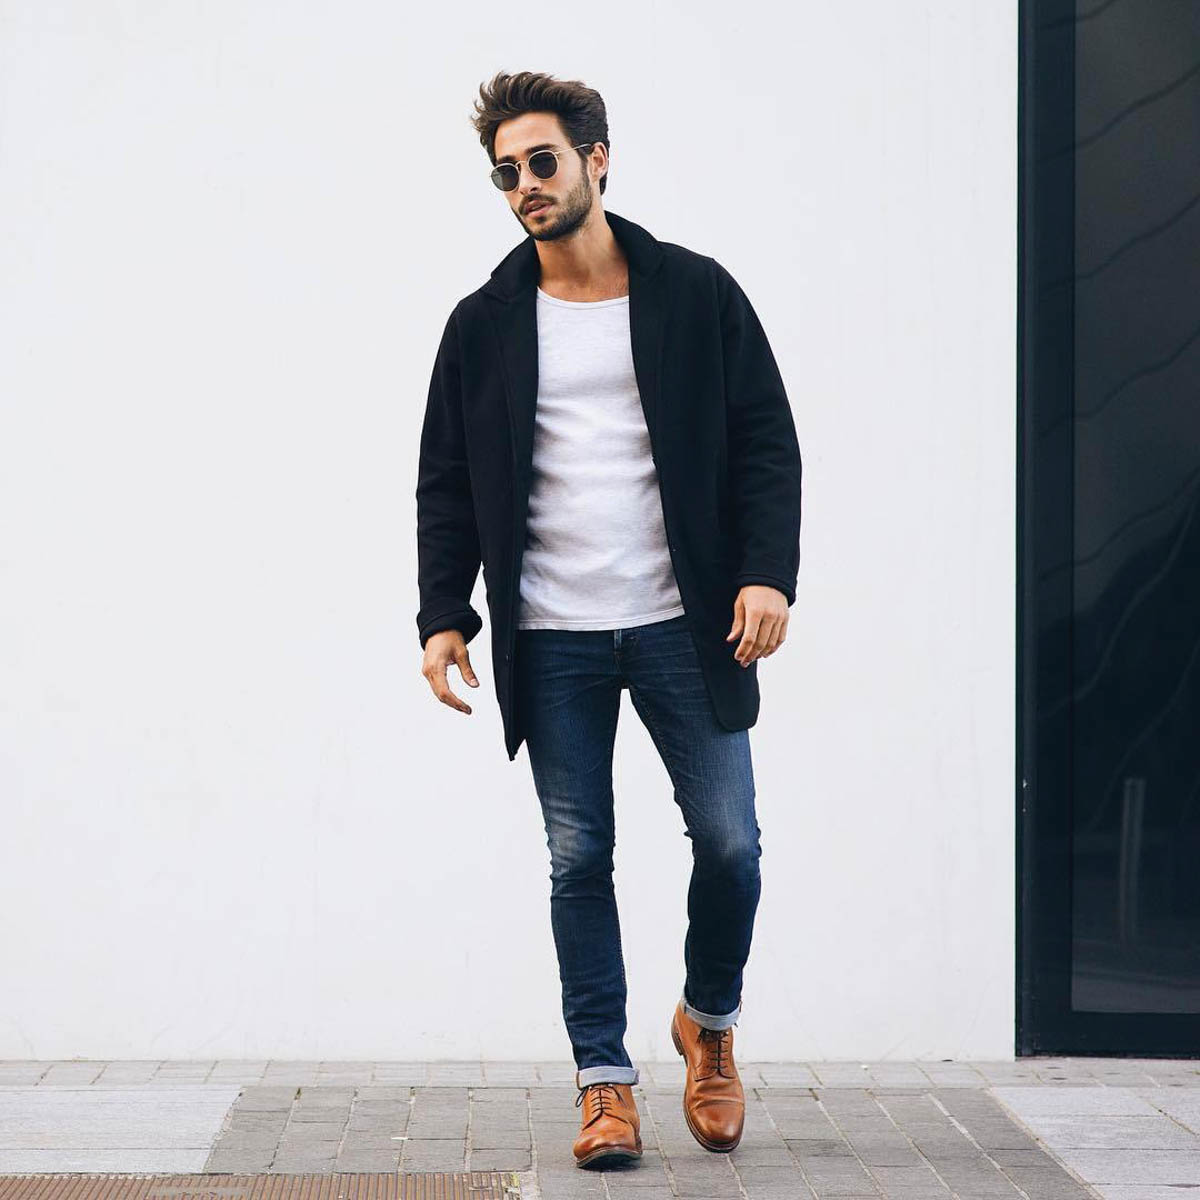 Best Alternatives To Wearing A Shirt And Still Look Stylish